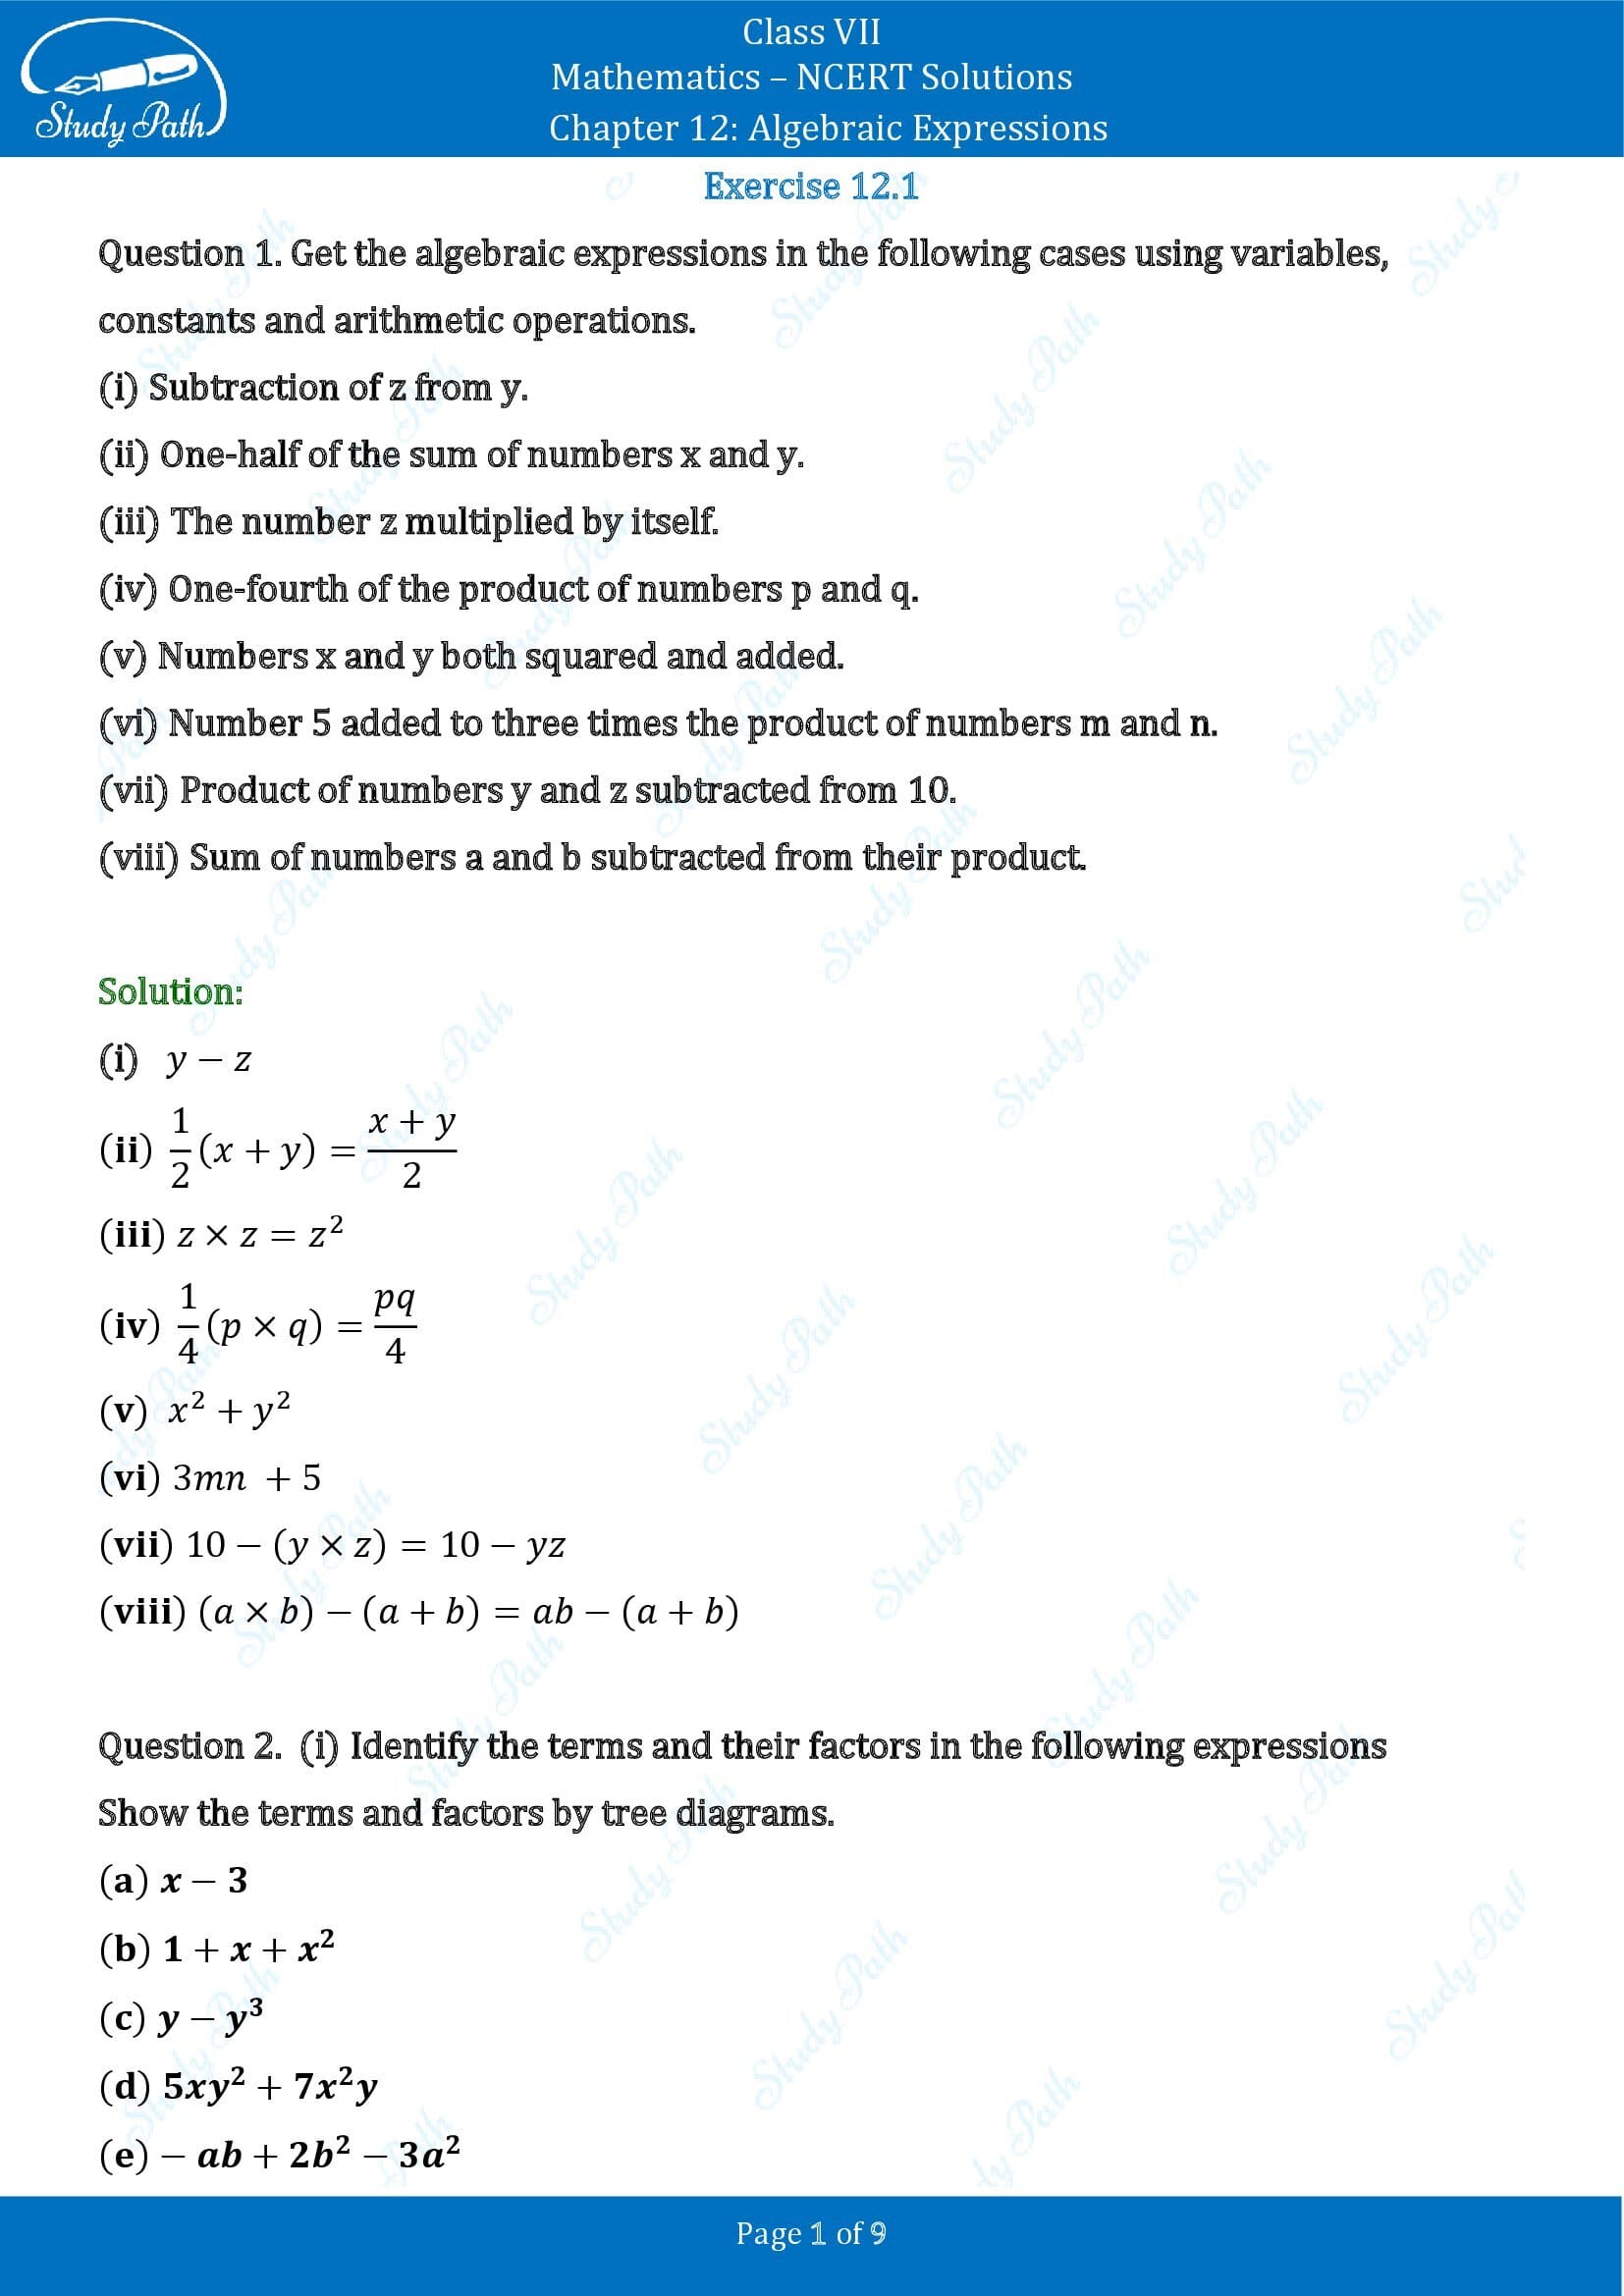 NCERT Solutions for Class 7 Maths Chapter 12 Algebraic Expressions Exercise 12.1 00001